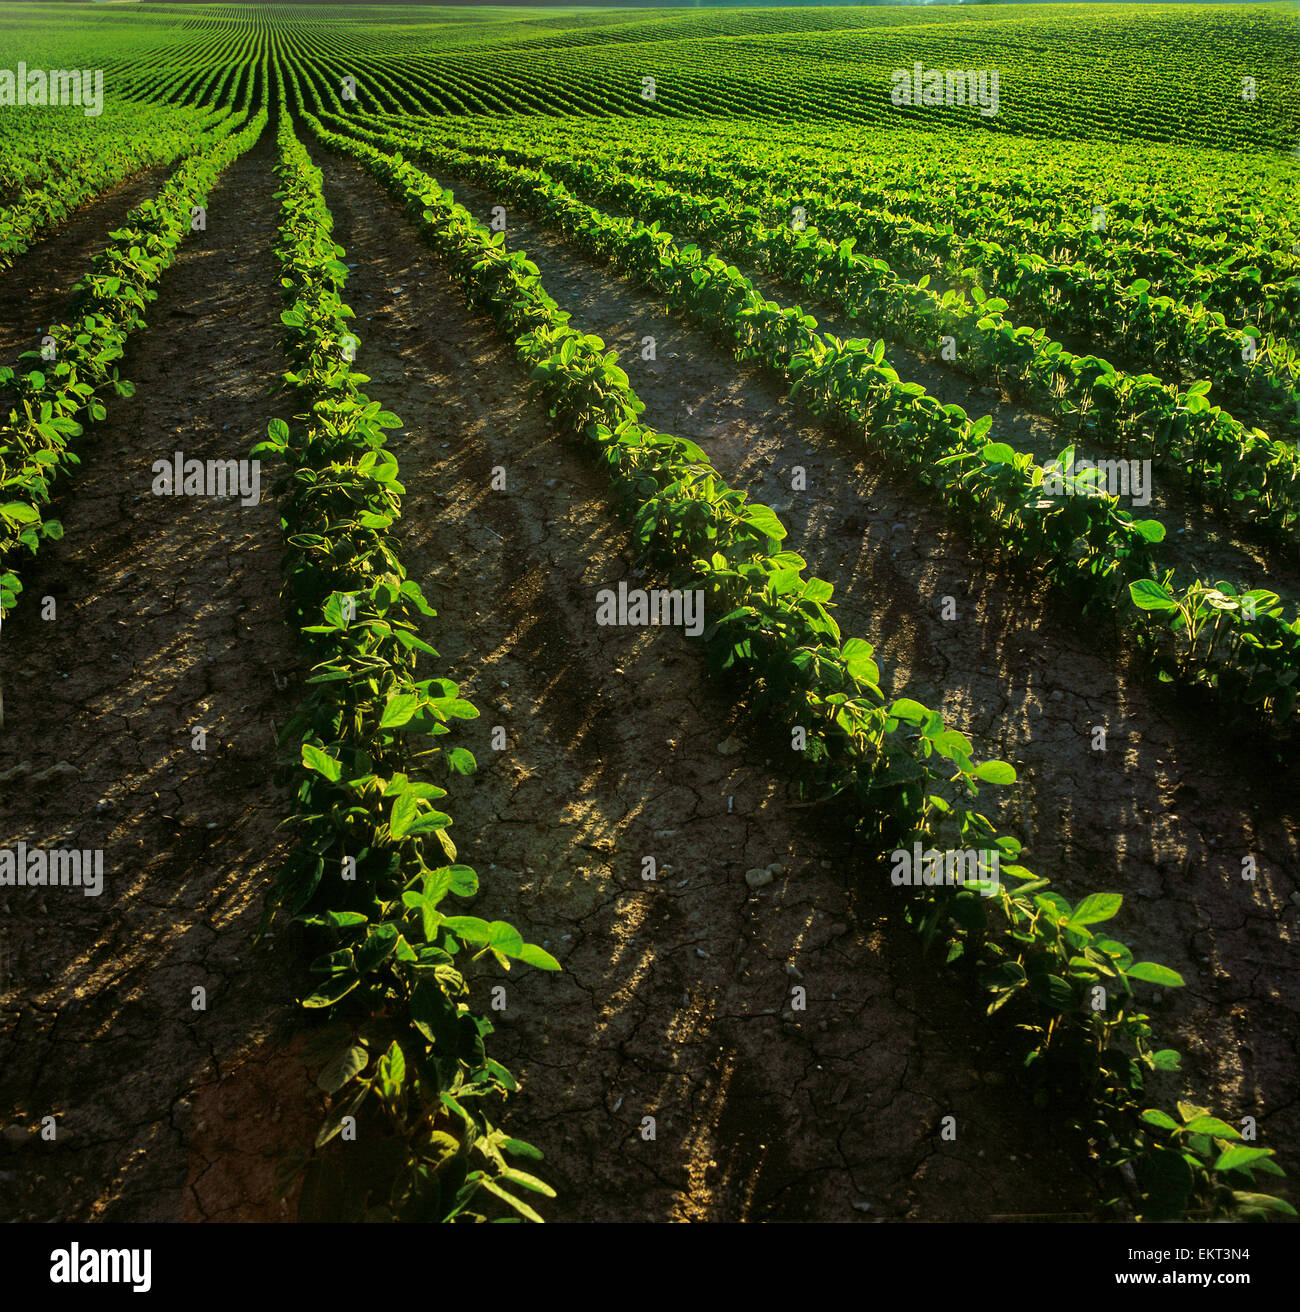 Agriculture - Large rolling field of early growth conventionally tilled soybeans / Ontario, Canada. Stock Photo